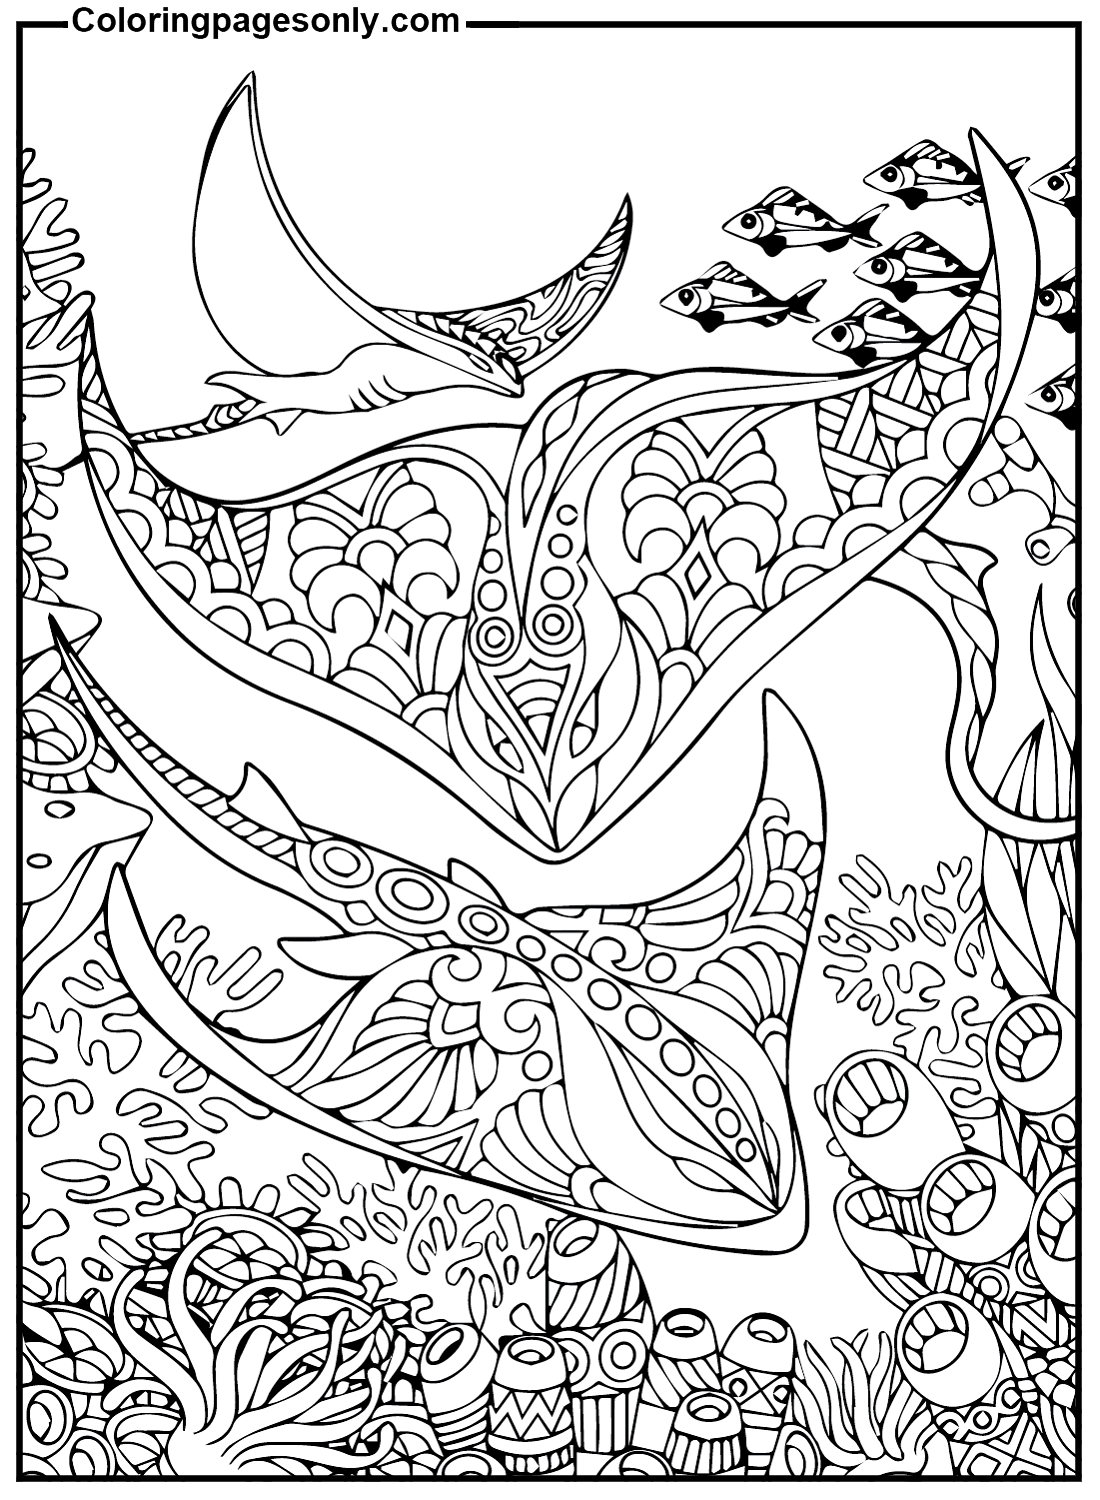 Stingray Color Sheets Coloring Pages